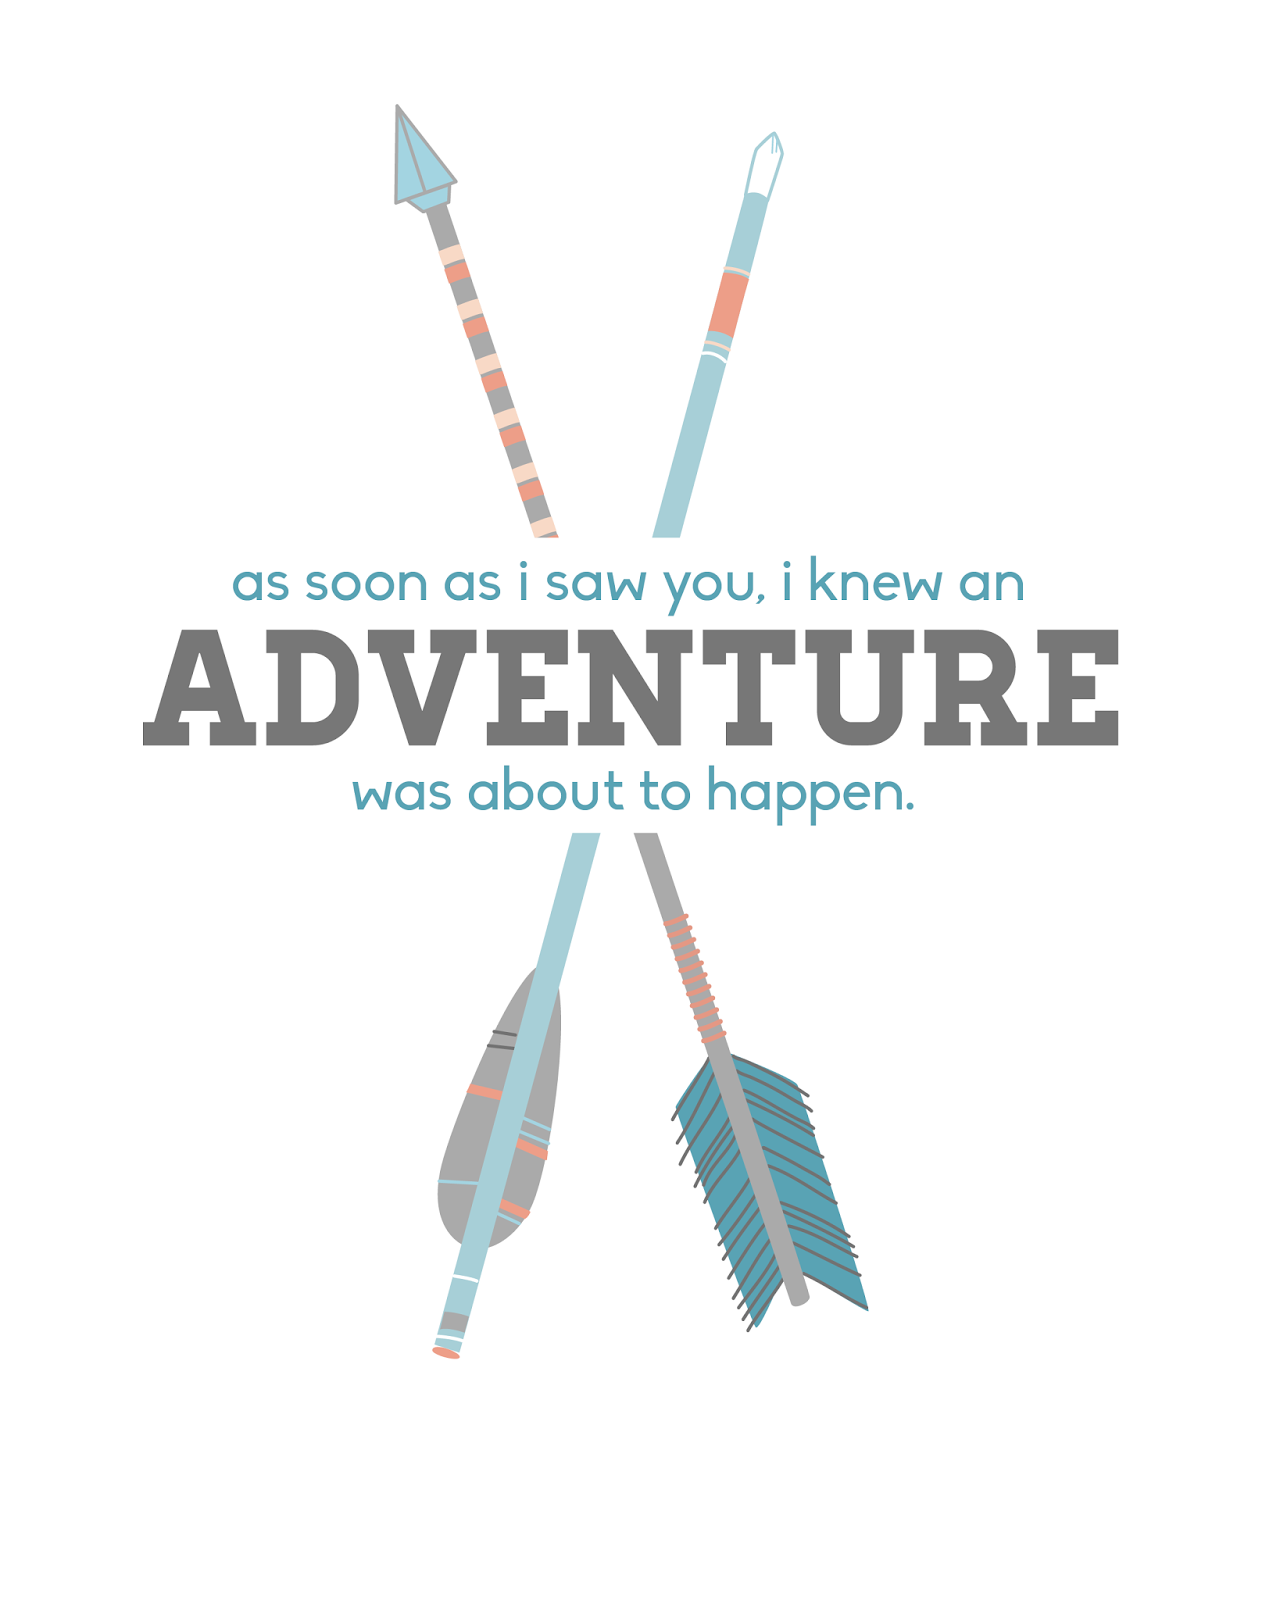 FREEBIES // 8X10 ADVENTURE PRINTABLES (5 COLORS), Oh So Lovely Blog